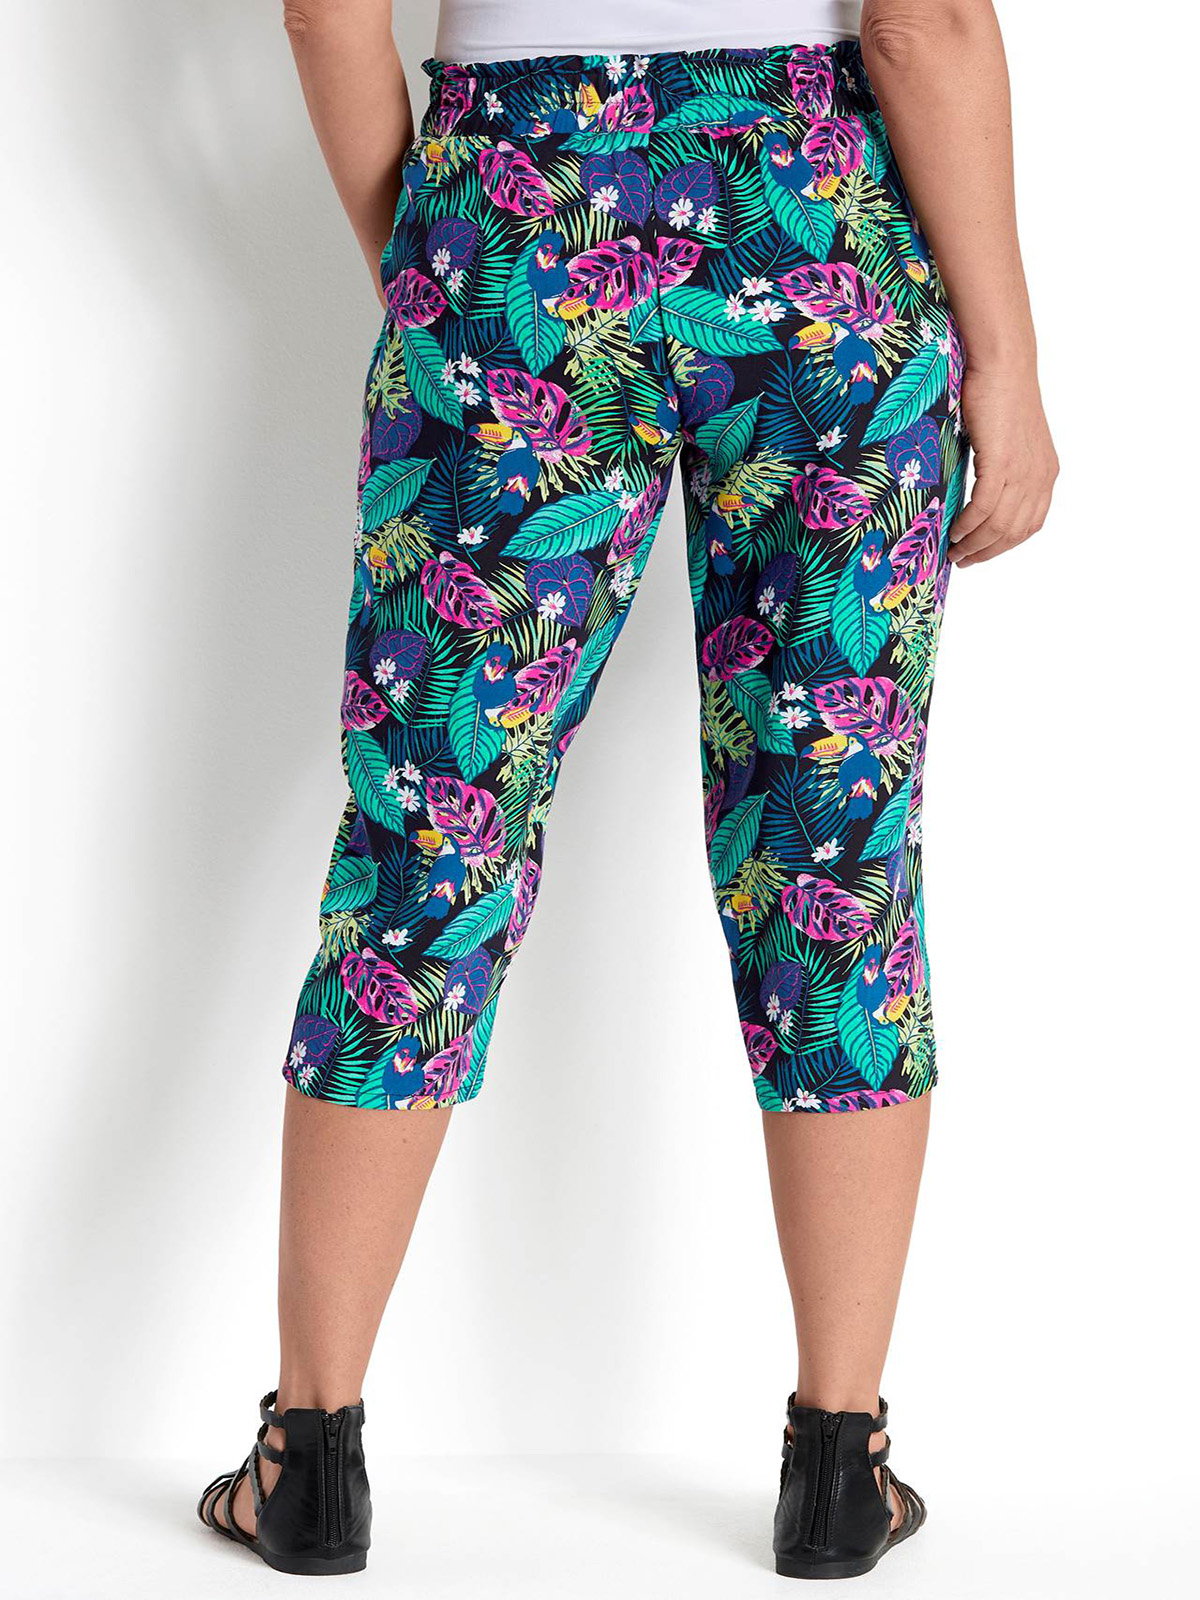 Wholesale Plus Size clothing, outsize ladies clothing by Cellbes ...